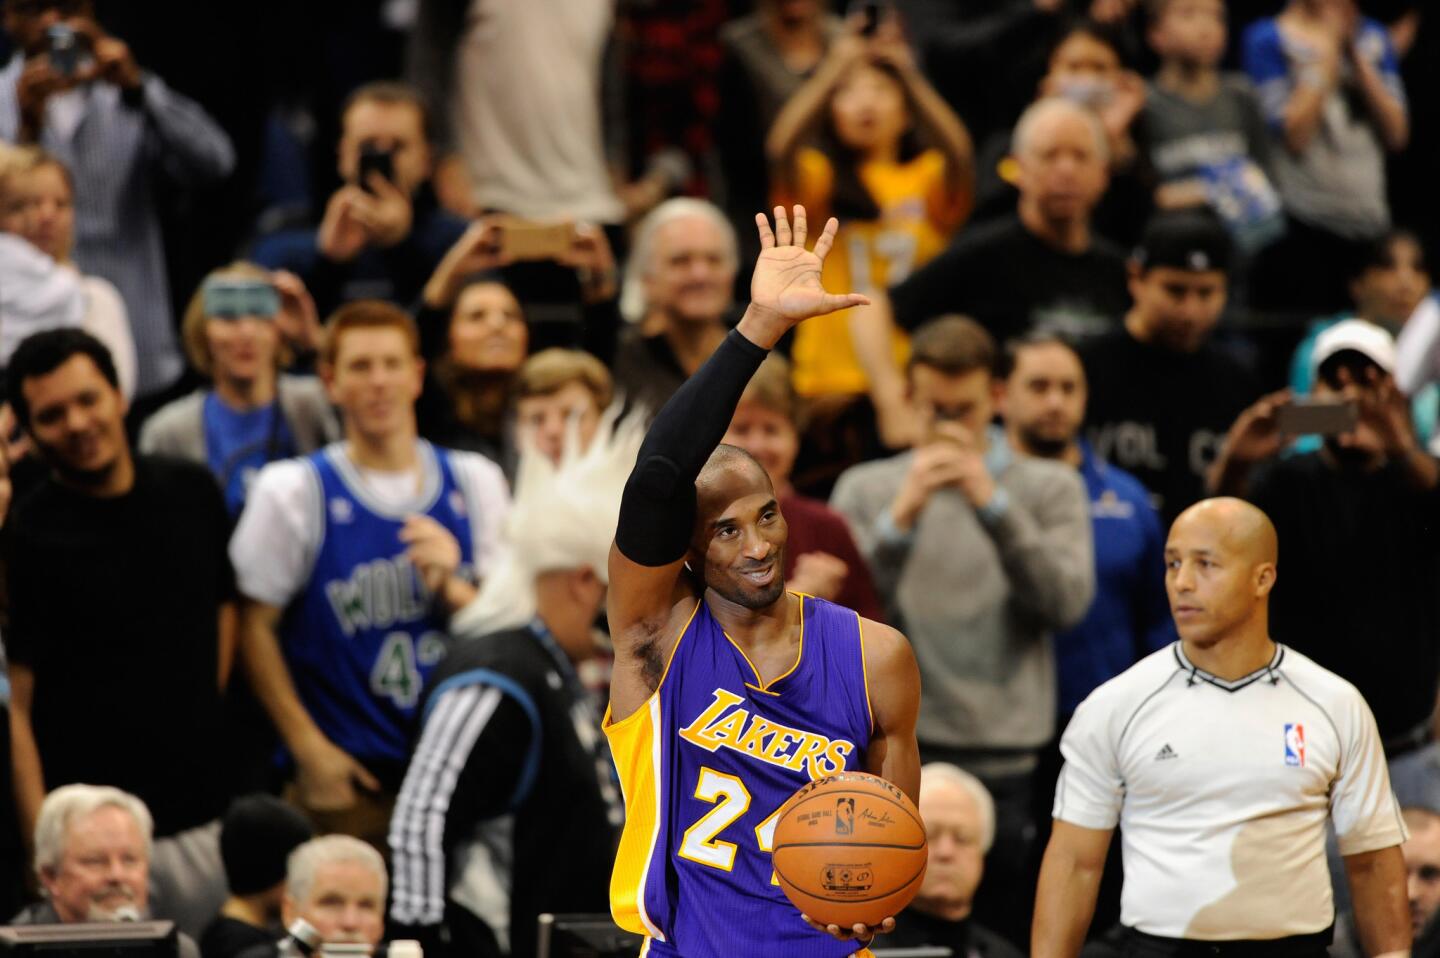 Lakers guard Kobe Bryant acknowledges the Minnesota crowd after passing Michael Jordan on the NBA all-time scoring list.